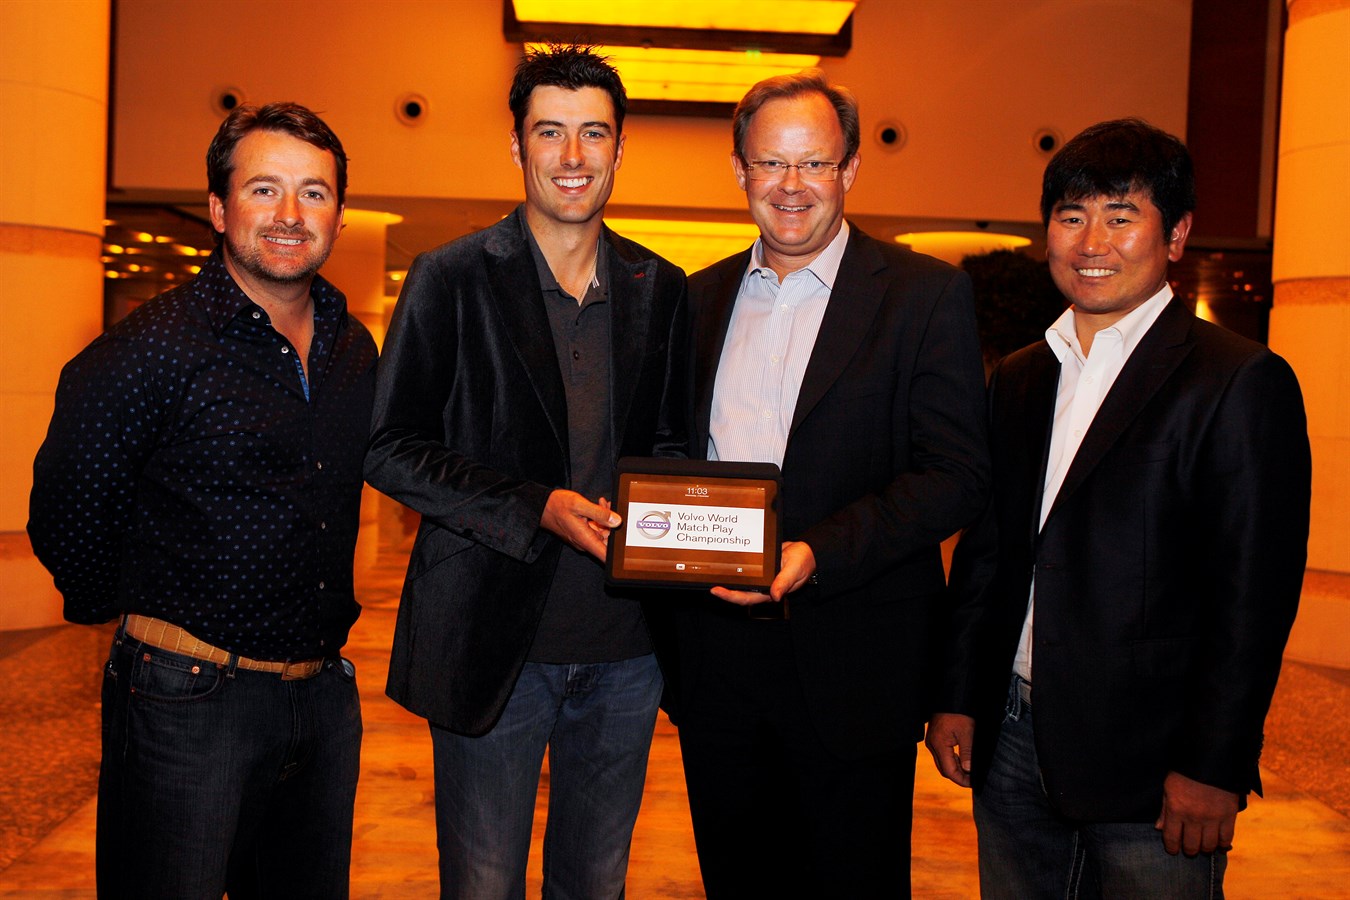 Graeme McDowell, Ross Fisher, Per Ericsson, President of Volvo Event Management Golf and Y E Yang